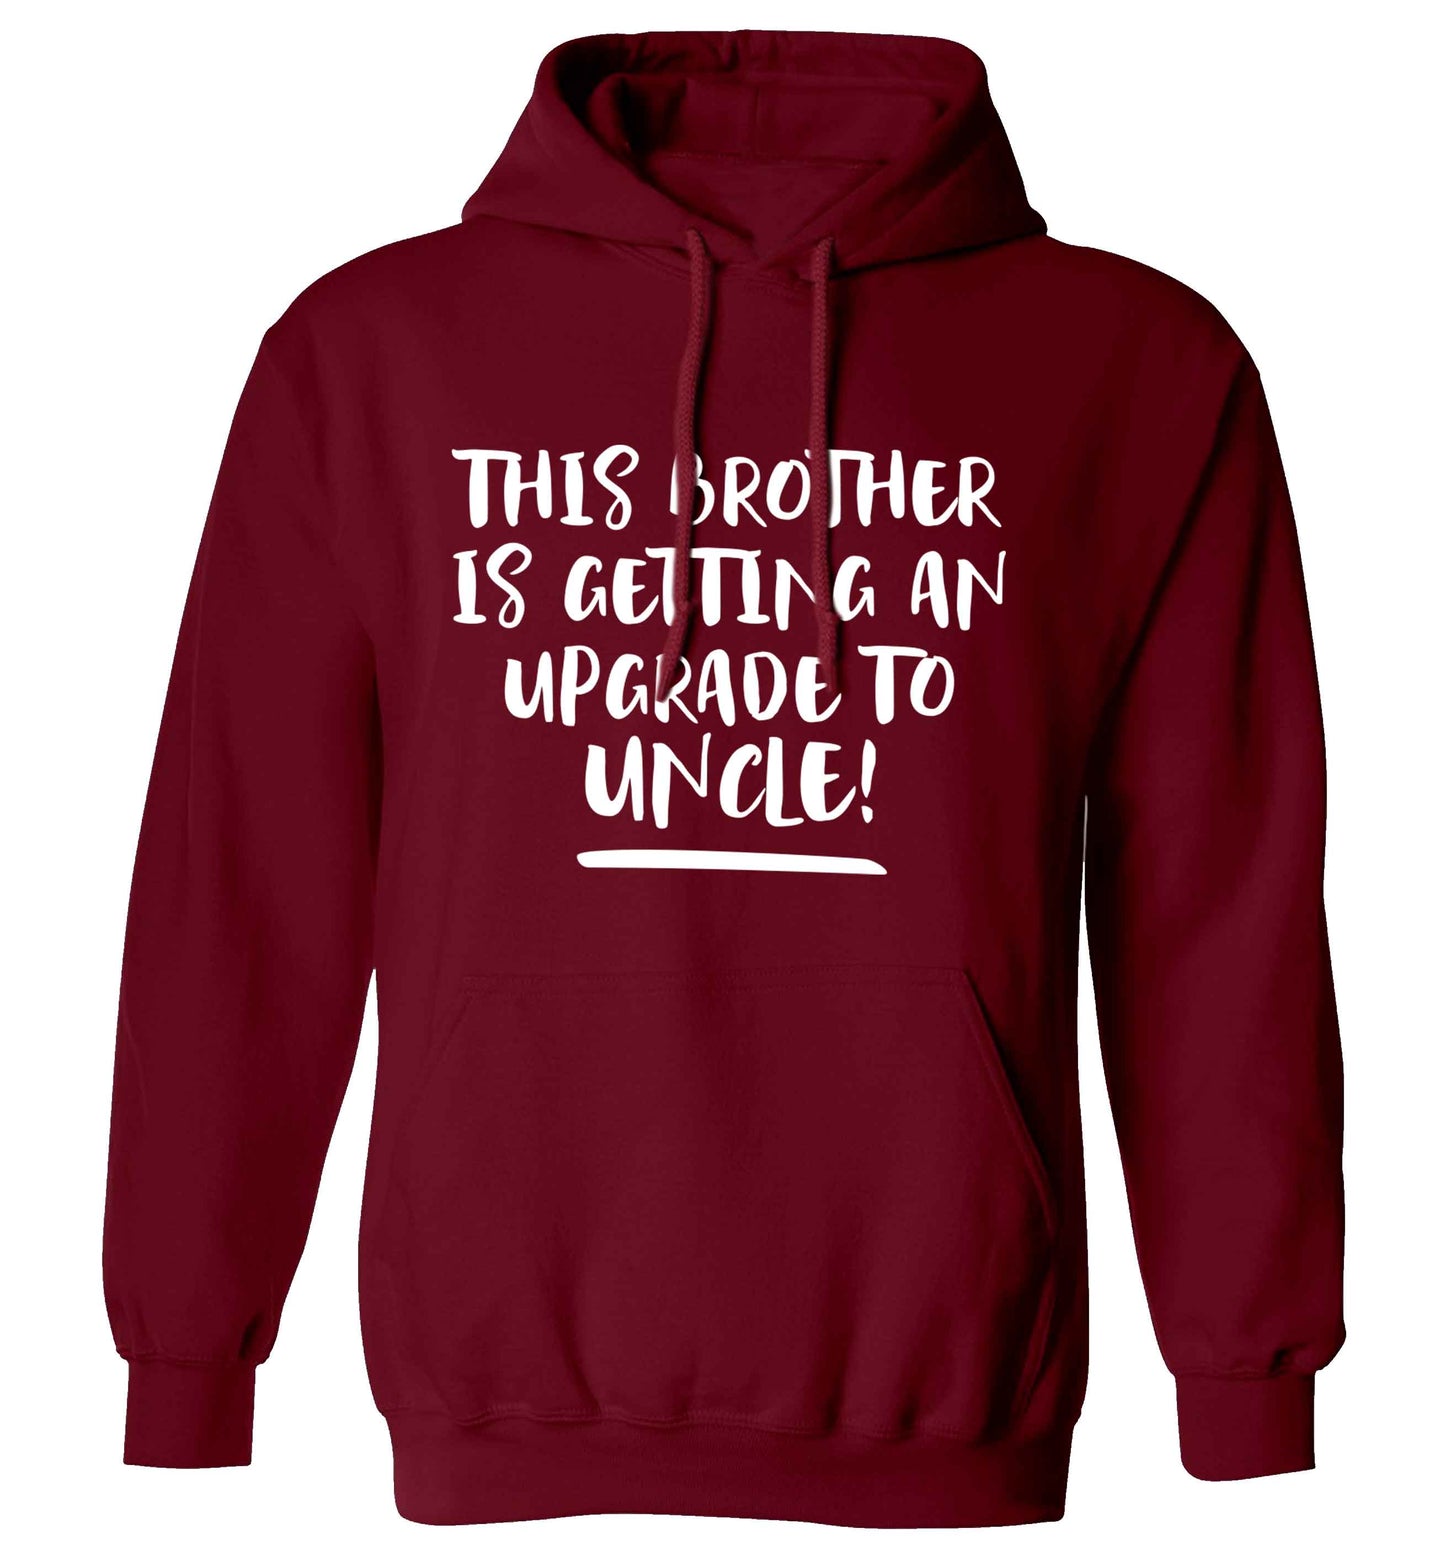 This brother is getting an upgrade to uncle! adults unisex maroon hoodie 2XL